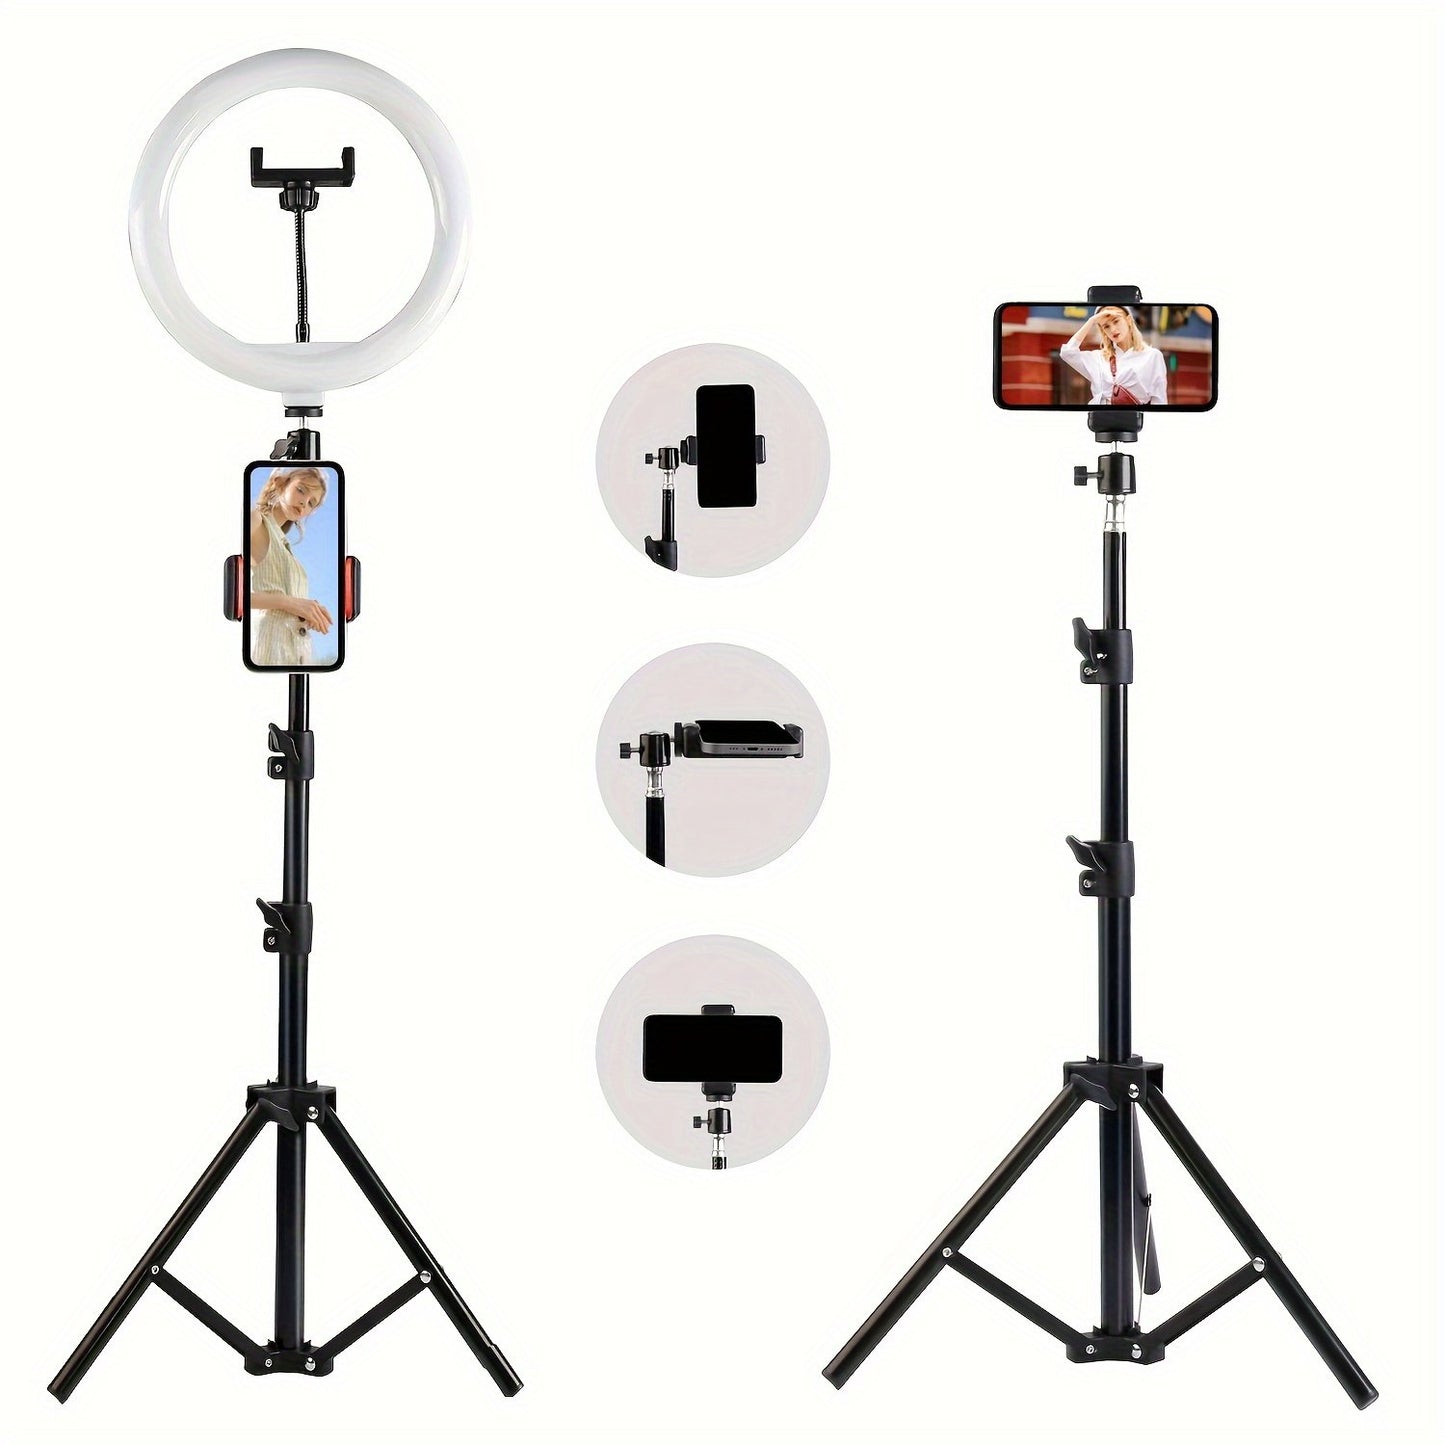 "3 colors Professional 55.5"" Selfie Ring Light Tripod Set with 2 Phone Holders - Perfect for Makeup, Photography, Videos, and Vlogging - 12 Brightness Levels and Multiple Modes for Stunning Results"